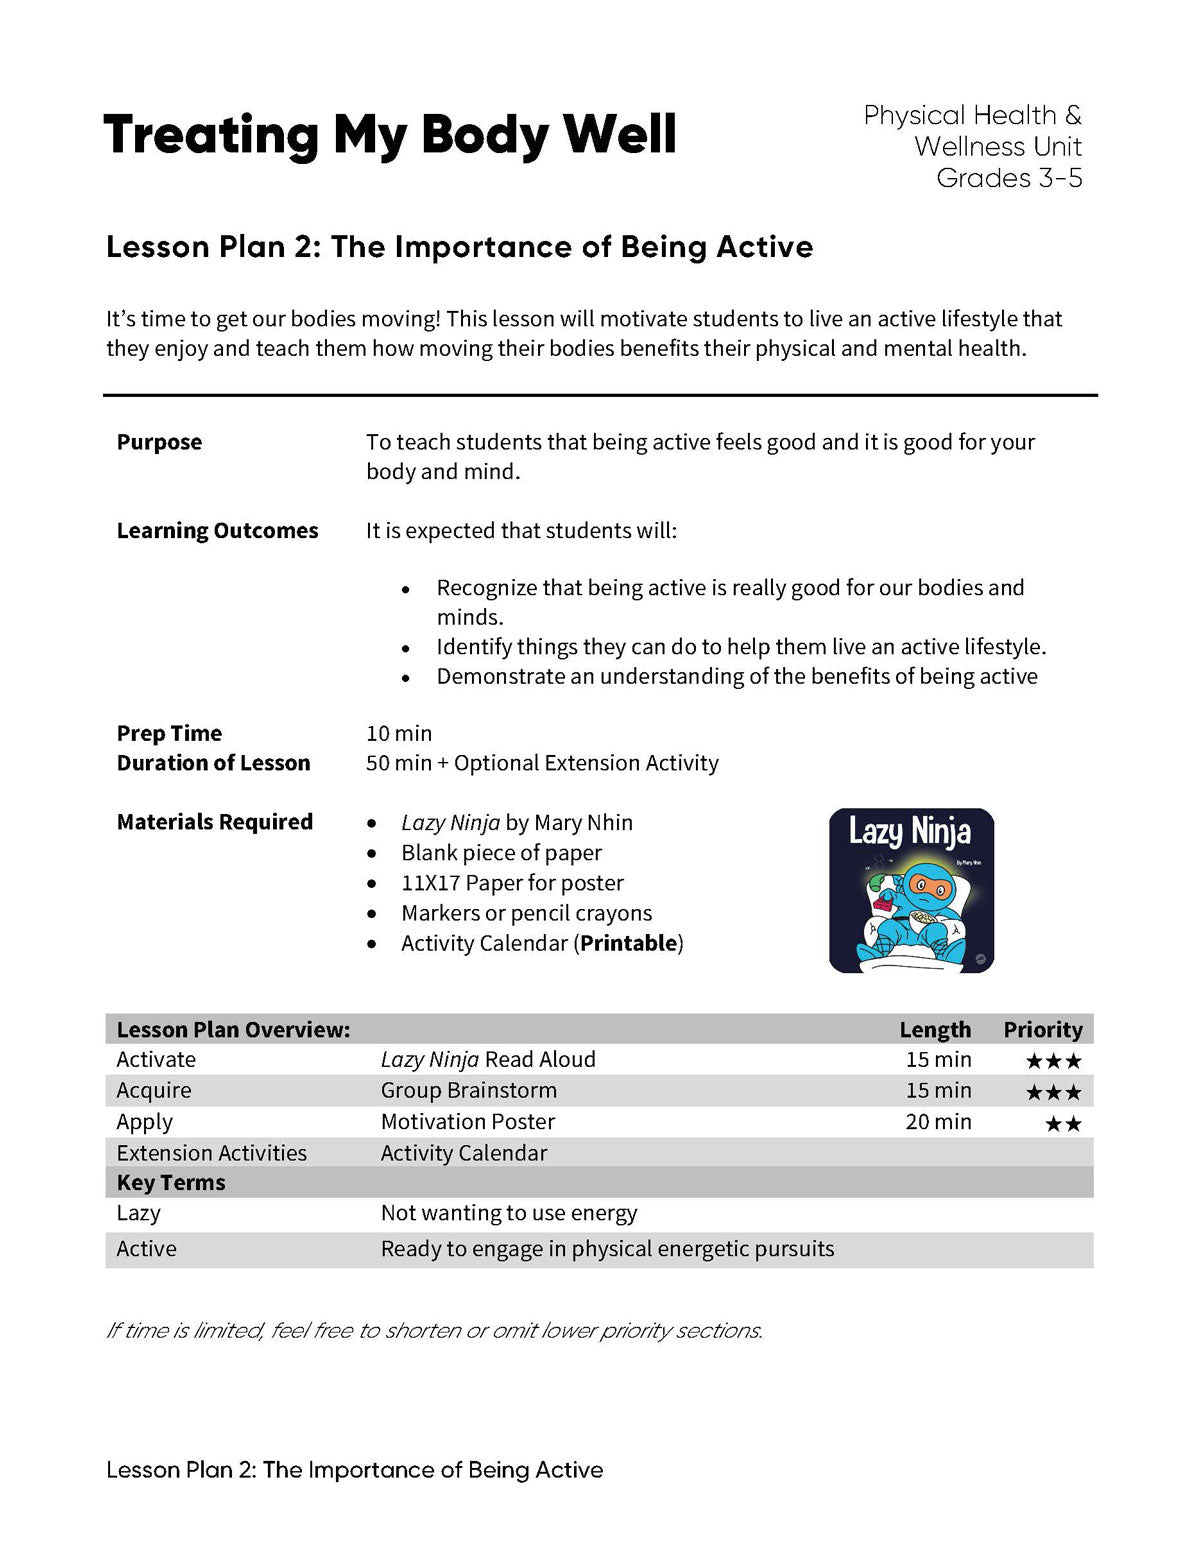 Lesson Plan 2: The Importance of Being Active